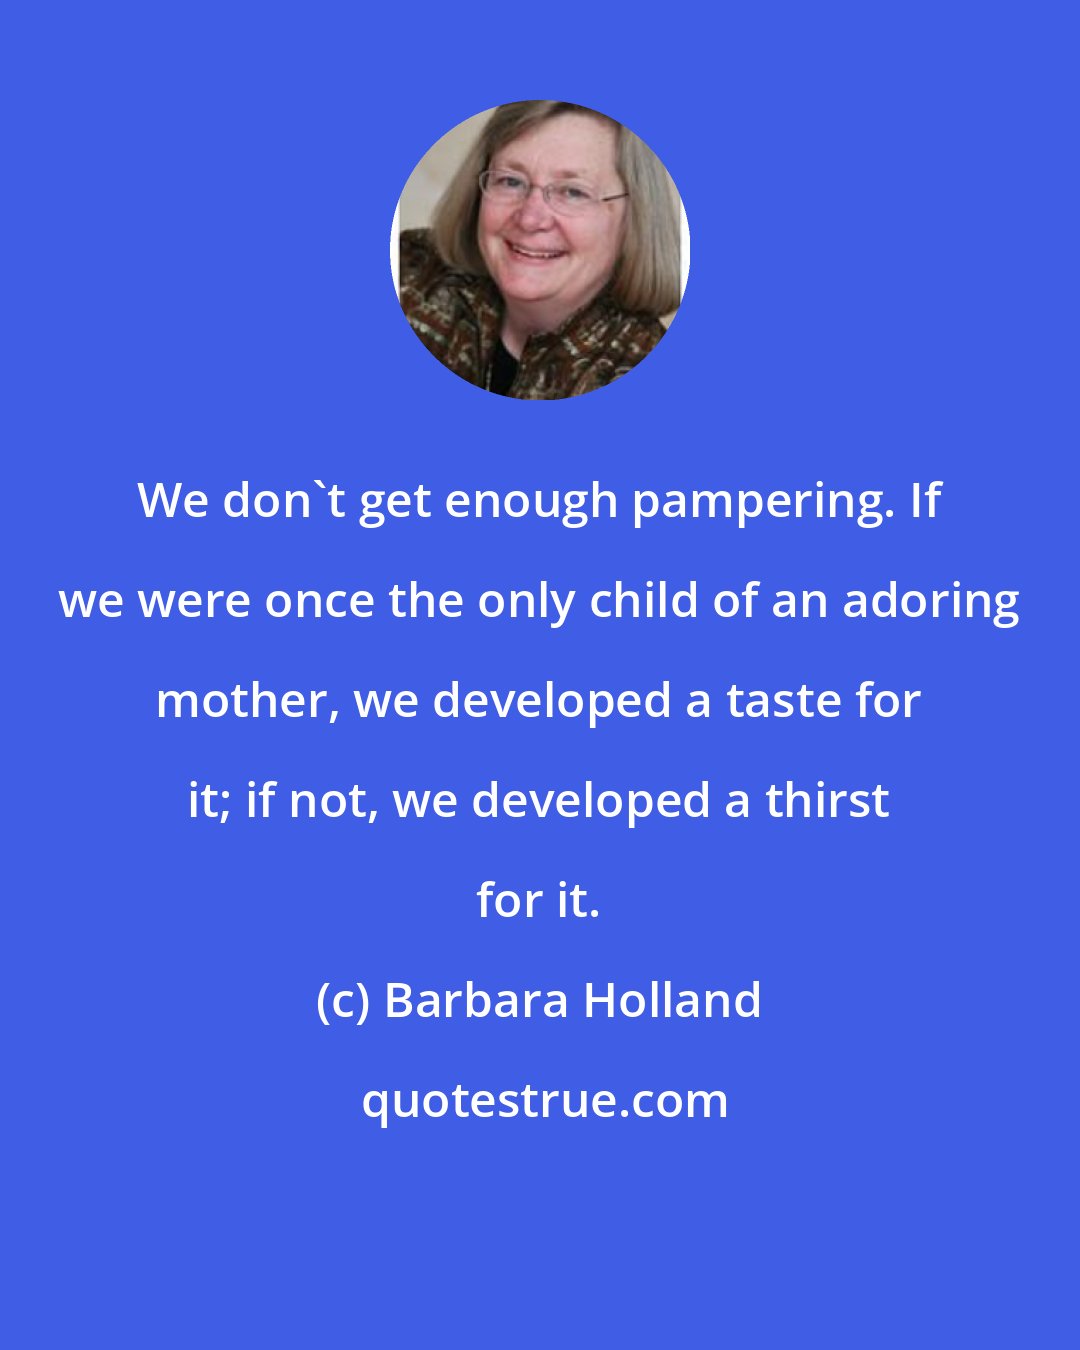 Barbara Holland: We don't get enough pampering. If we were once the only child of an adoring mother, we developed a taste for it; if not, we developed a thirst for it.